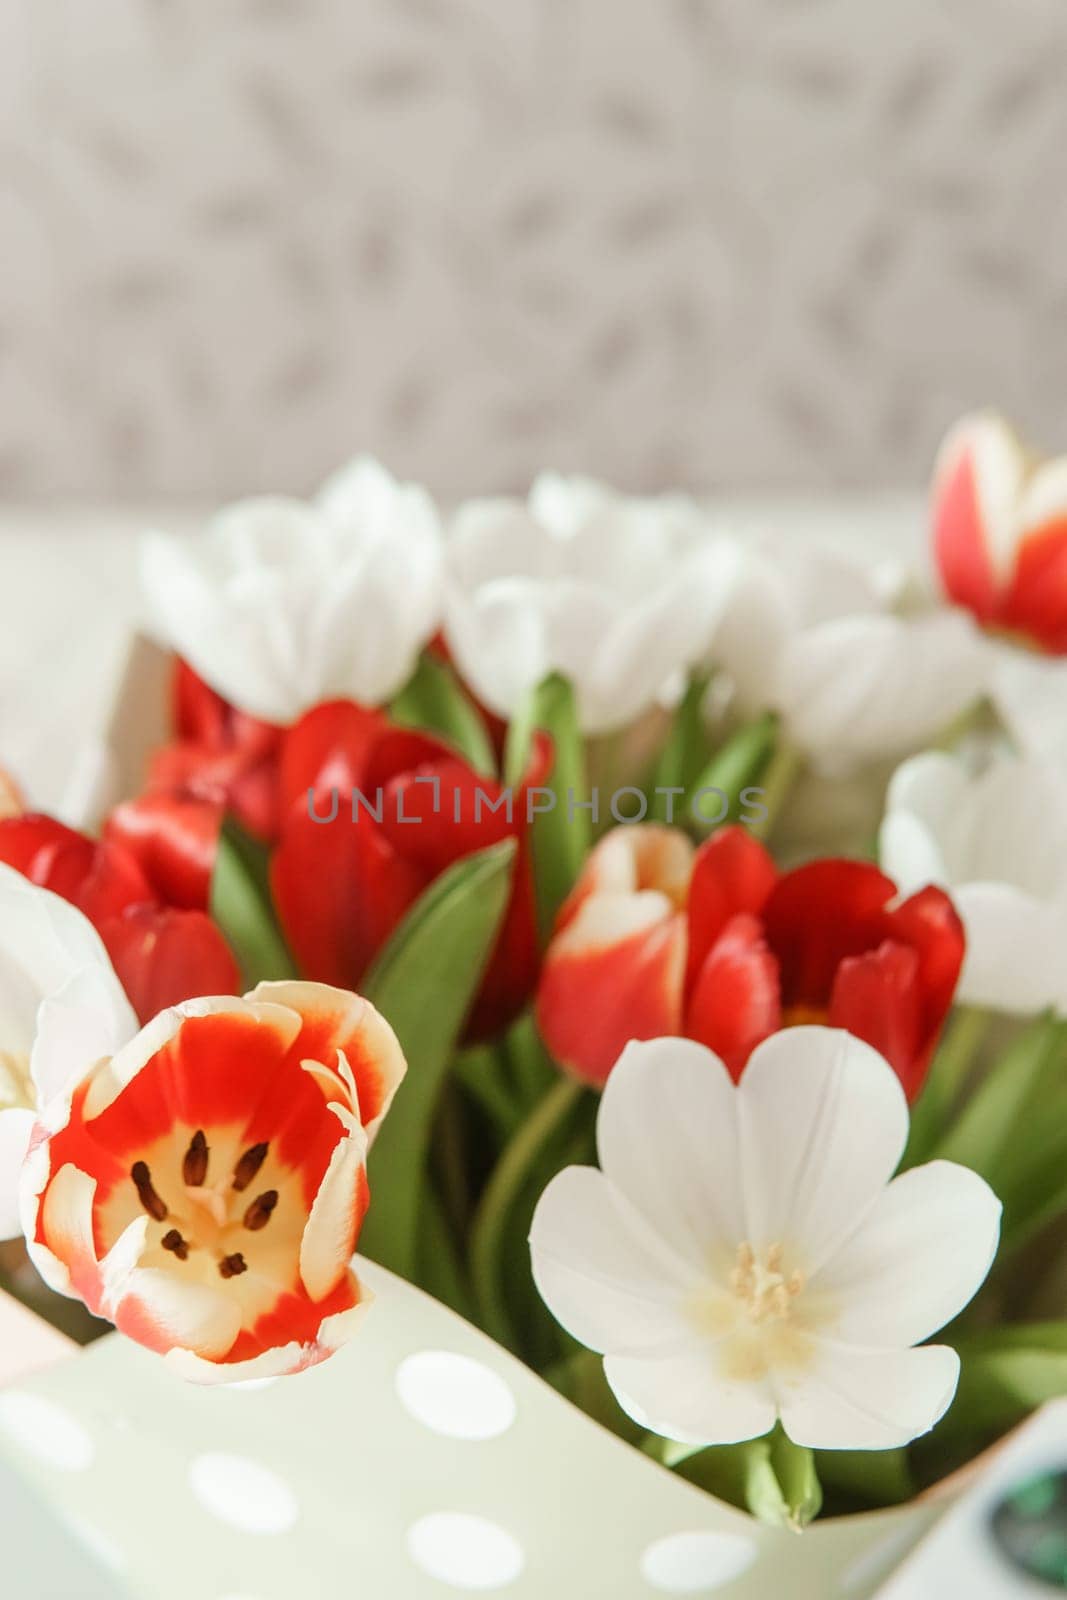 Celebration of Beauty: Tulips in Close-up as a Gift for March 8th by Annu1tochka